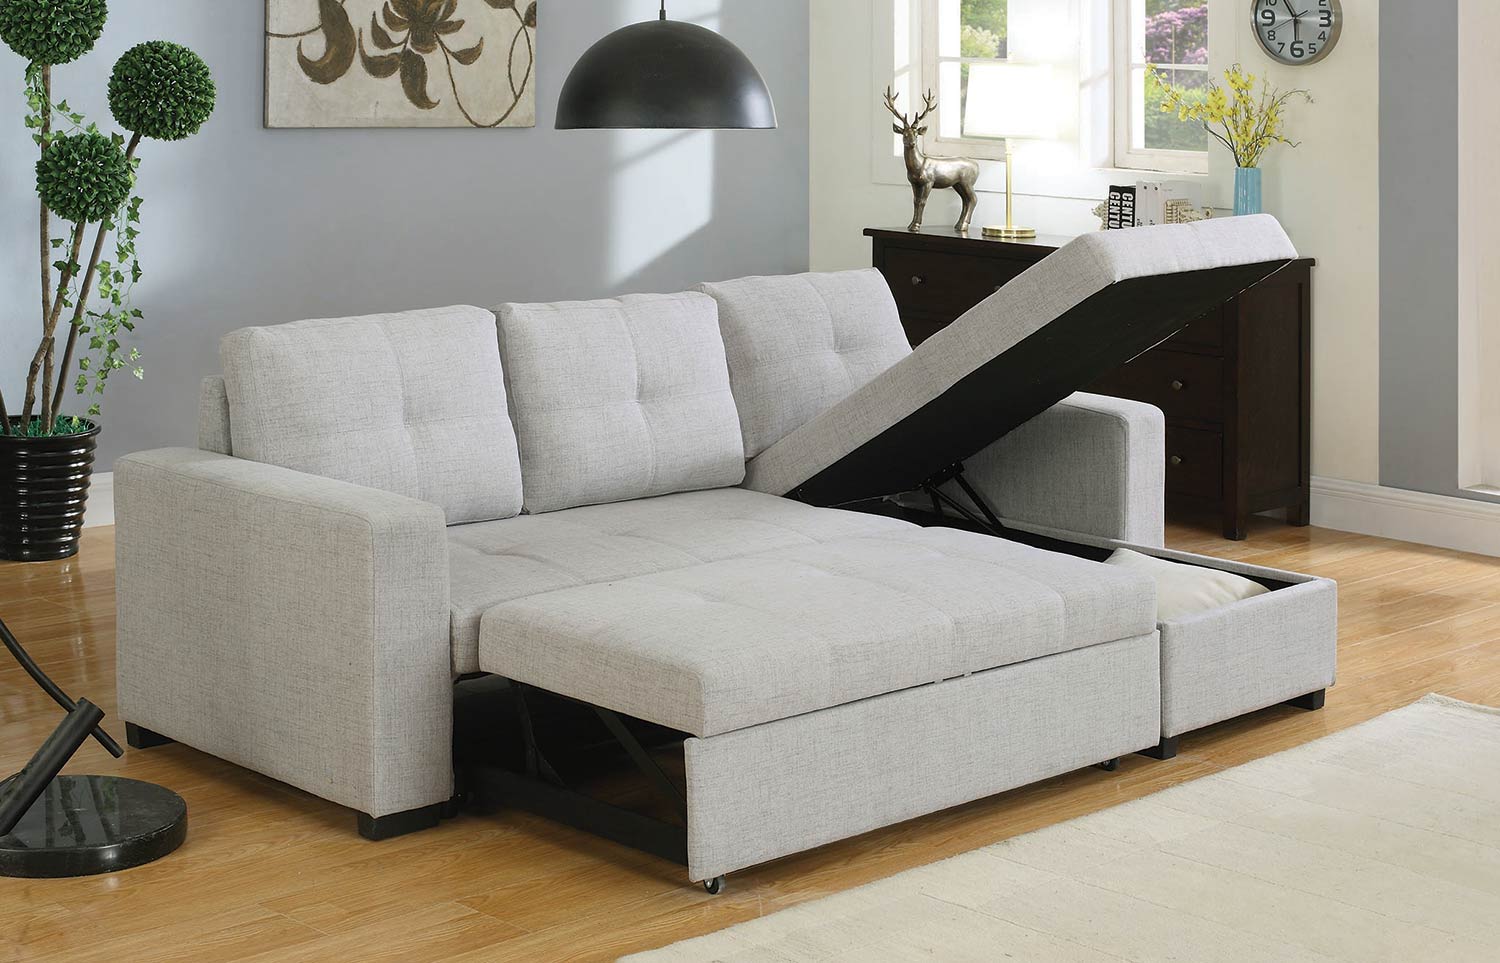 Coaster Everly Sectional Sofa - Beige